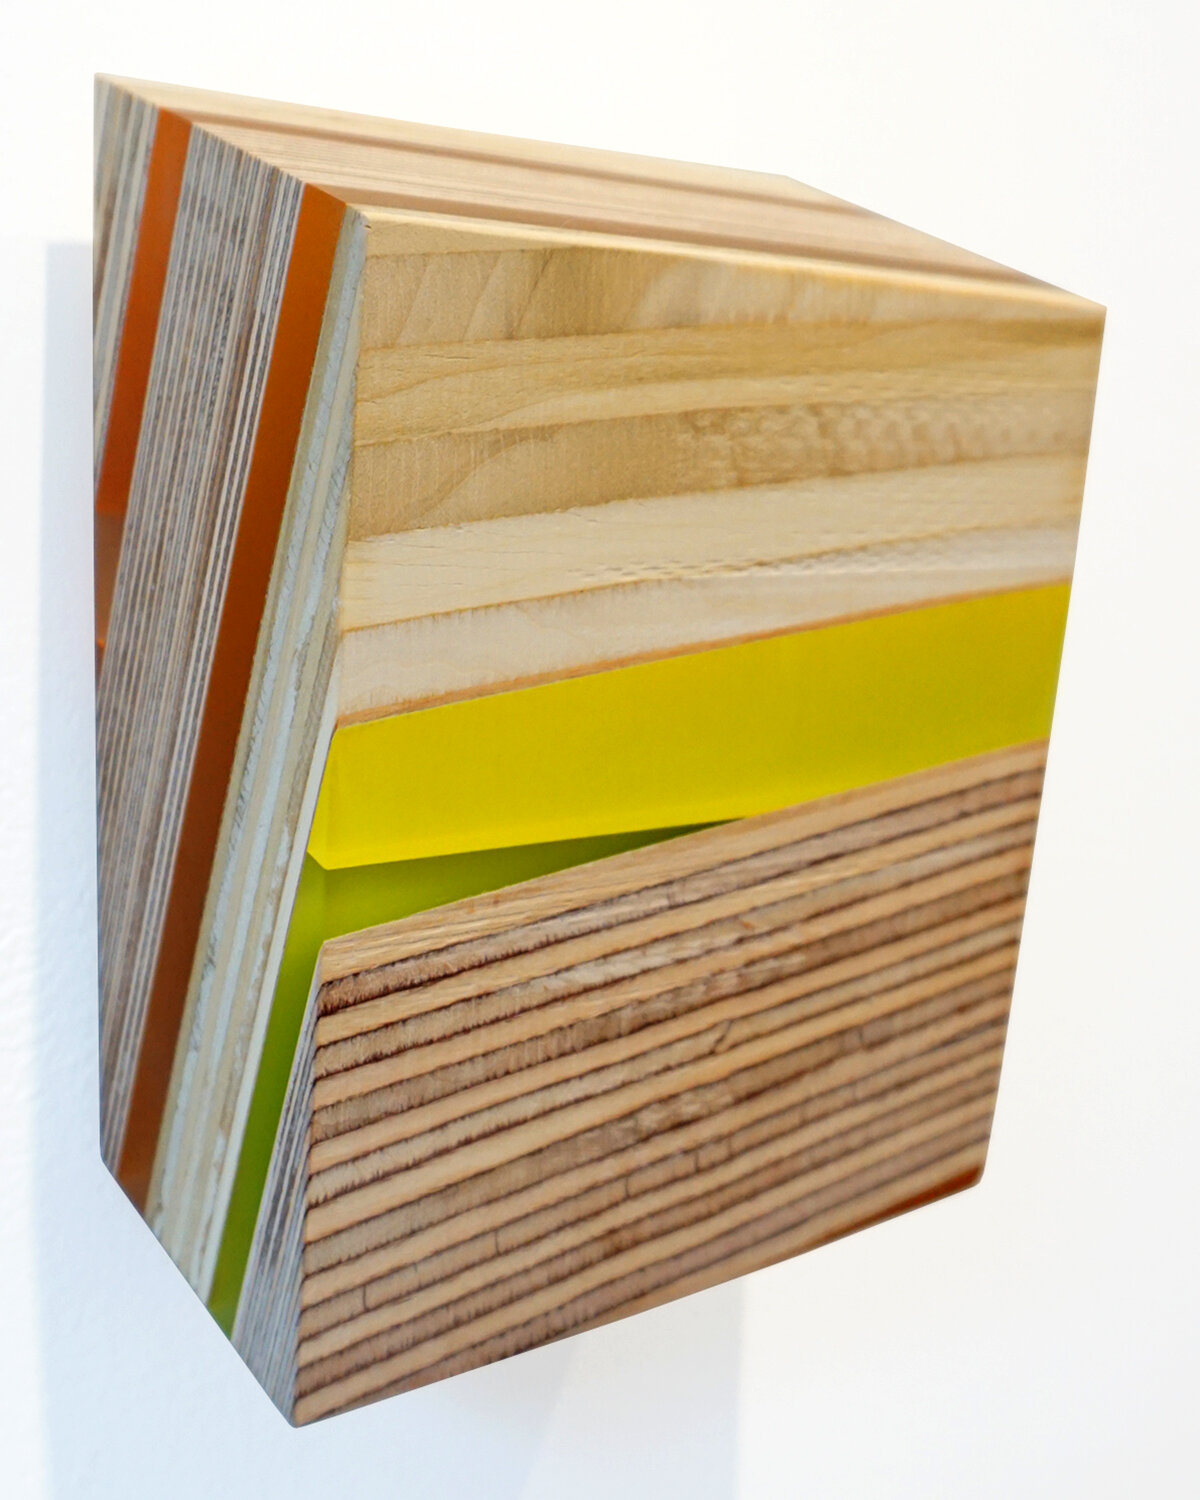 Pyrite Paisley Series: In Yellow (side view), 9.75 x 7.125 x 4 inches / 24.8 x 18.1 x 10.2 cm, mixed media on various plywoods and Lucite, 2019